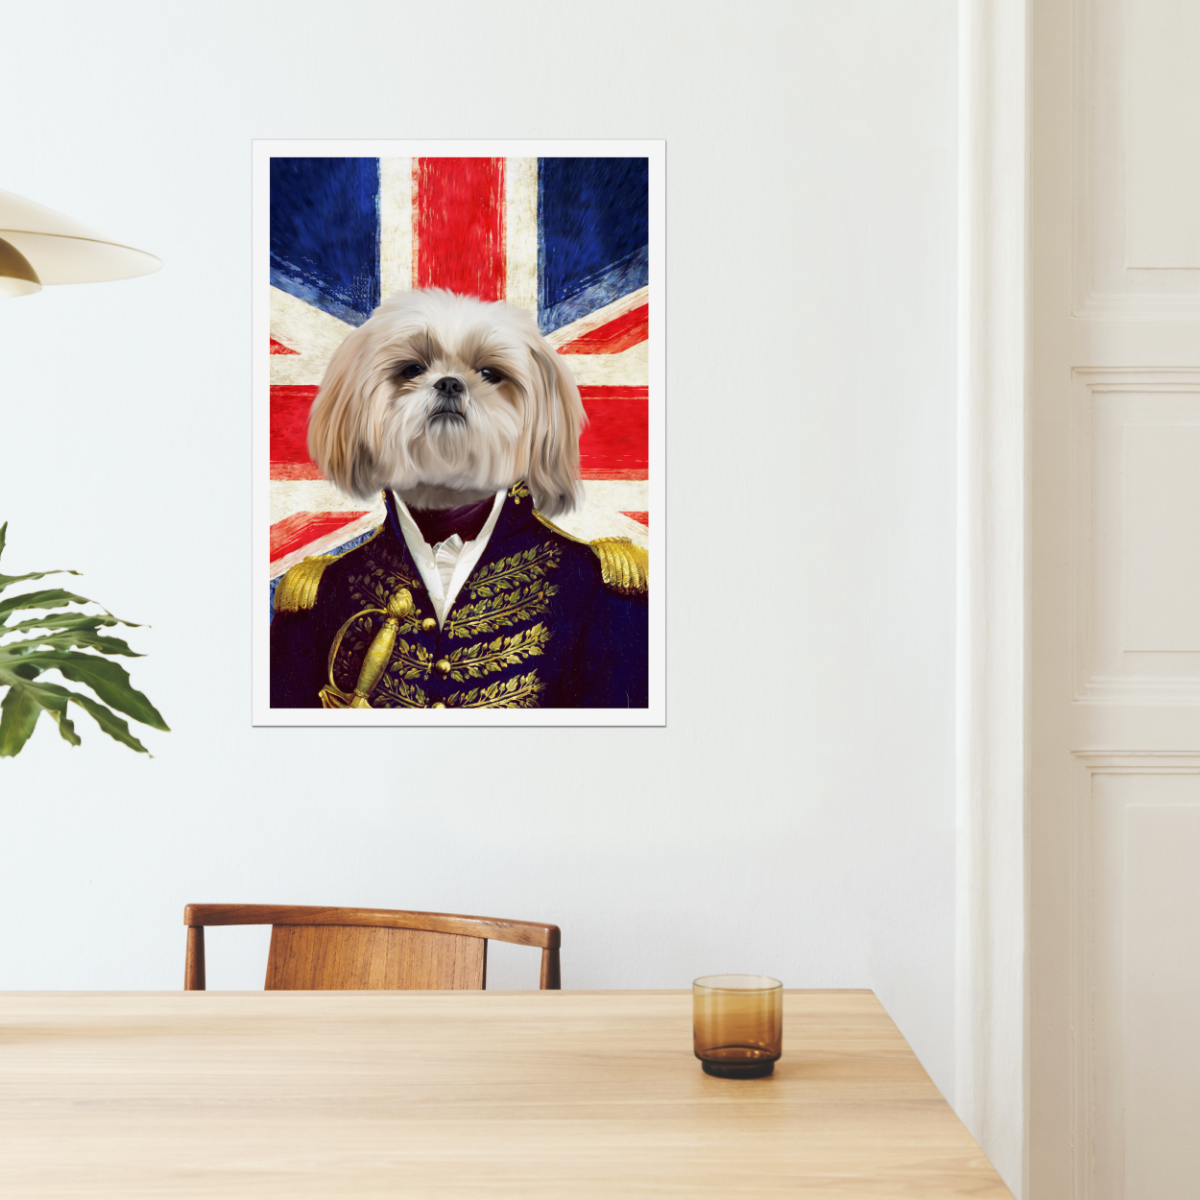 The General - British Flag Edition: Custom Pet Poster - Paw & Glory - #pet portraits# - #dog portraits# - #pet portraits uk#Paw & Glory, paw and glory, crown and paw alternative dog poster custom painting with dog, puppy painting pet portraits near me, procreate pet portrait pet portrait